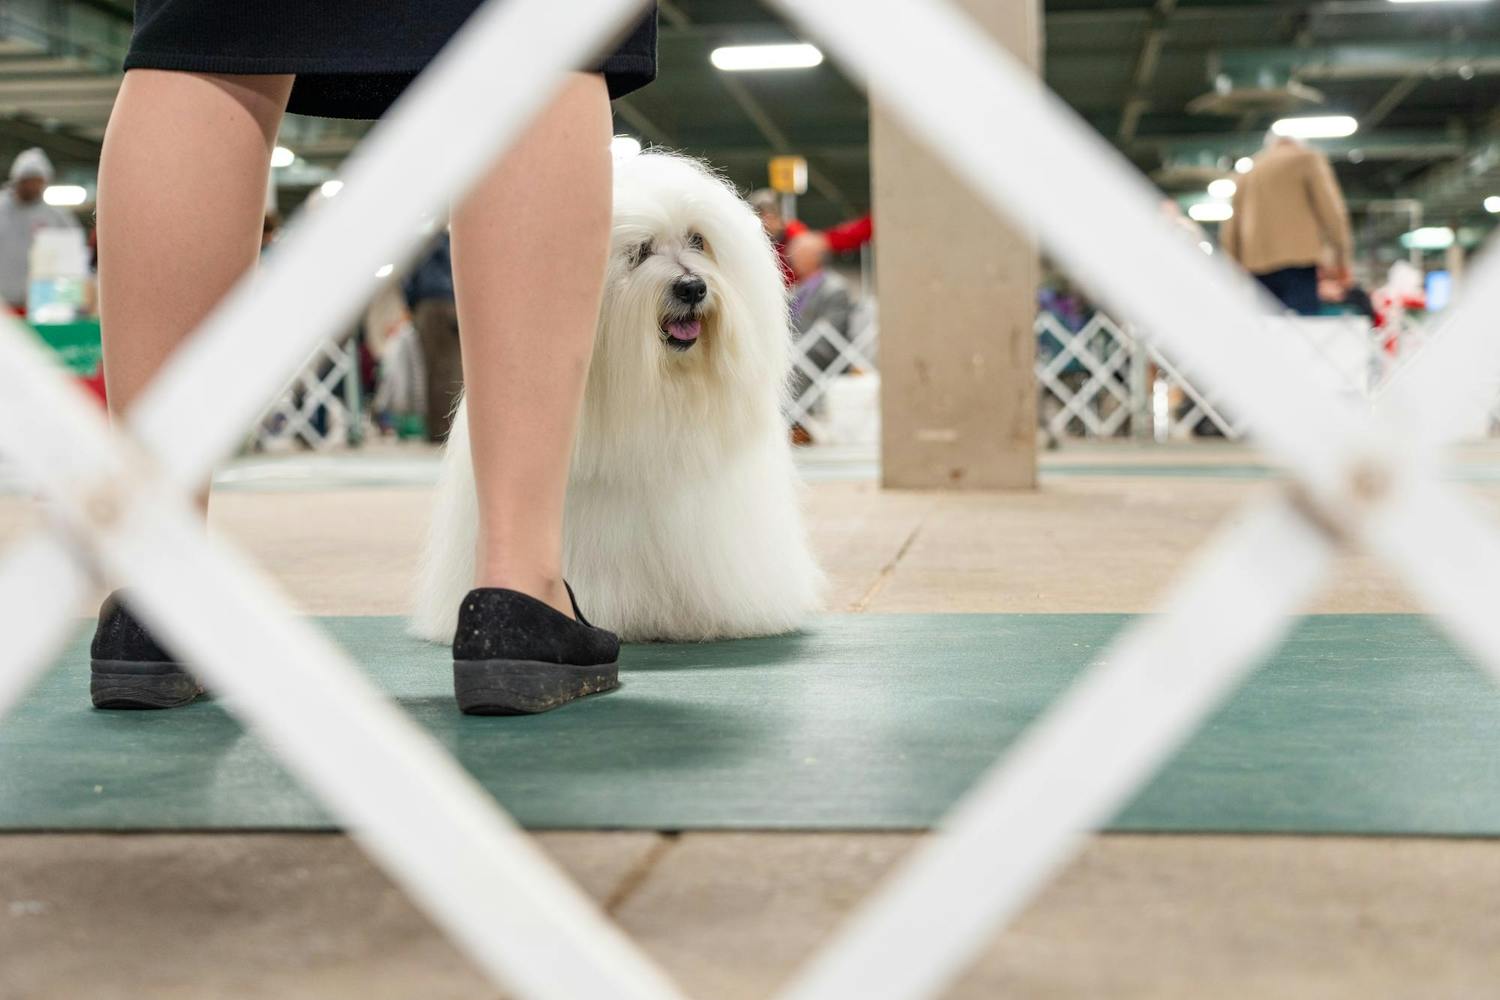 Dogs of all kinds compete at the Winterland Classic Dog Show The